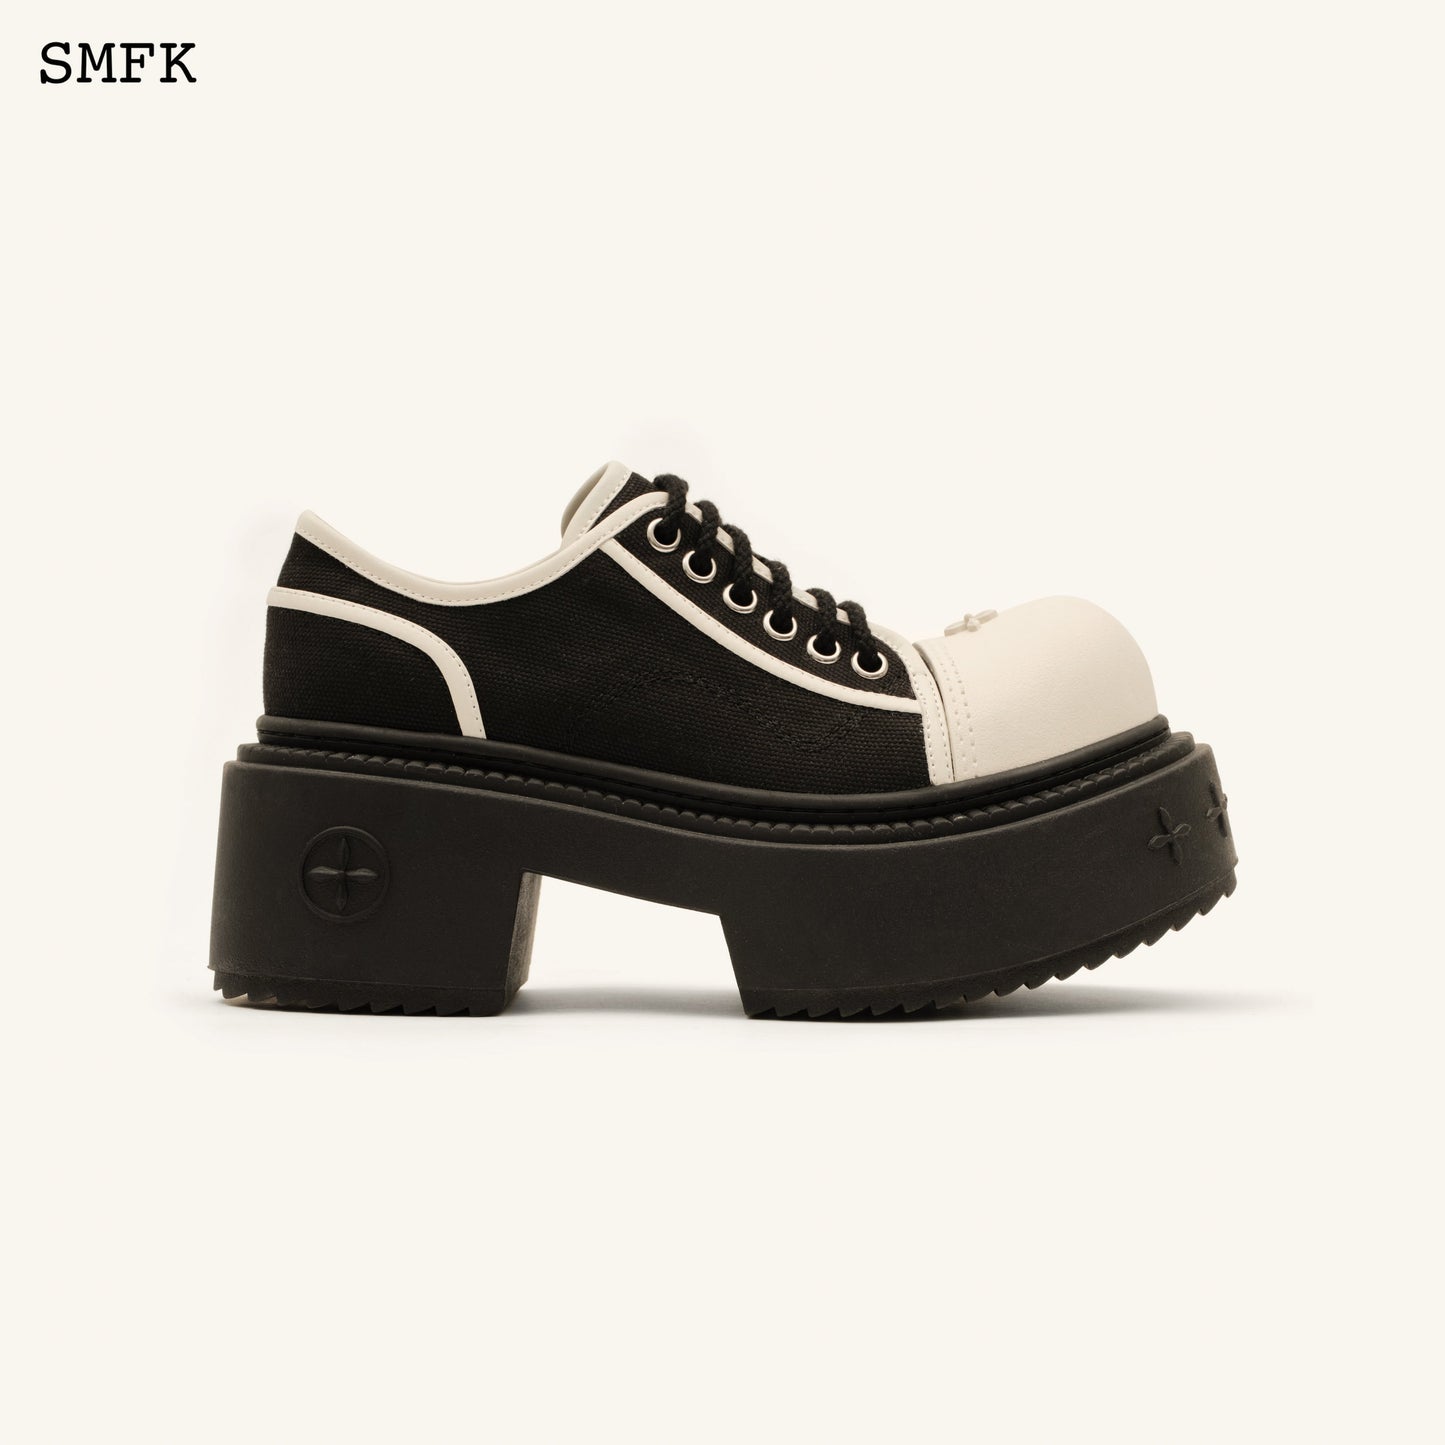 SMFK Compass Rider Low-Top Boots In Black And White